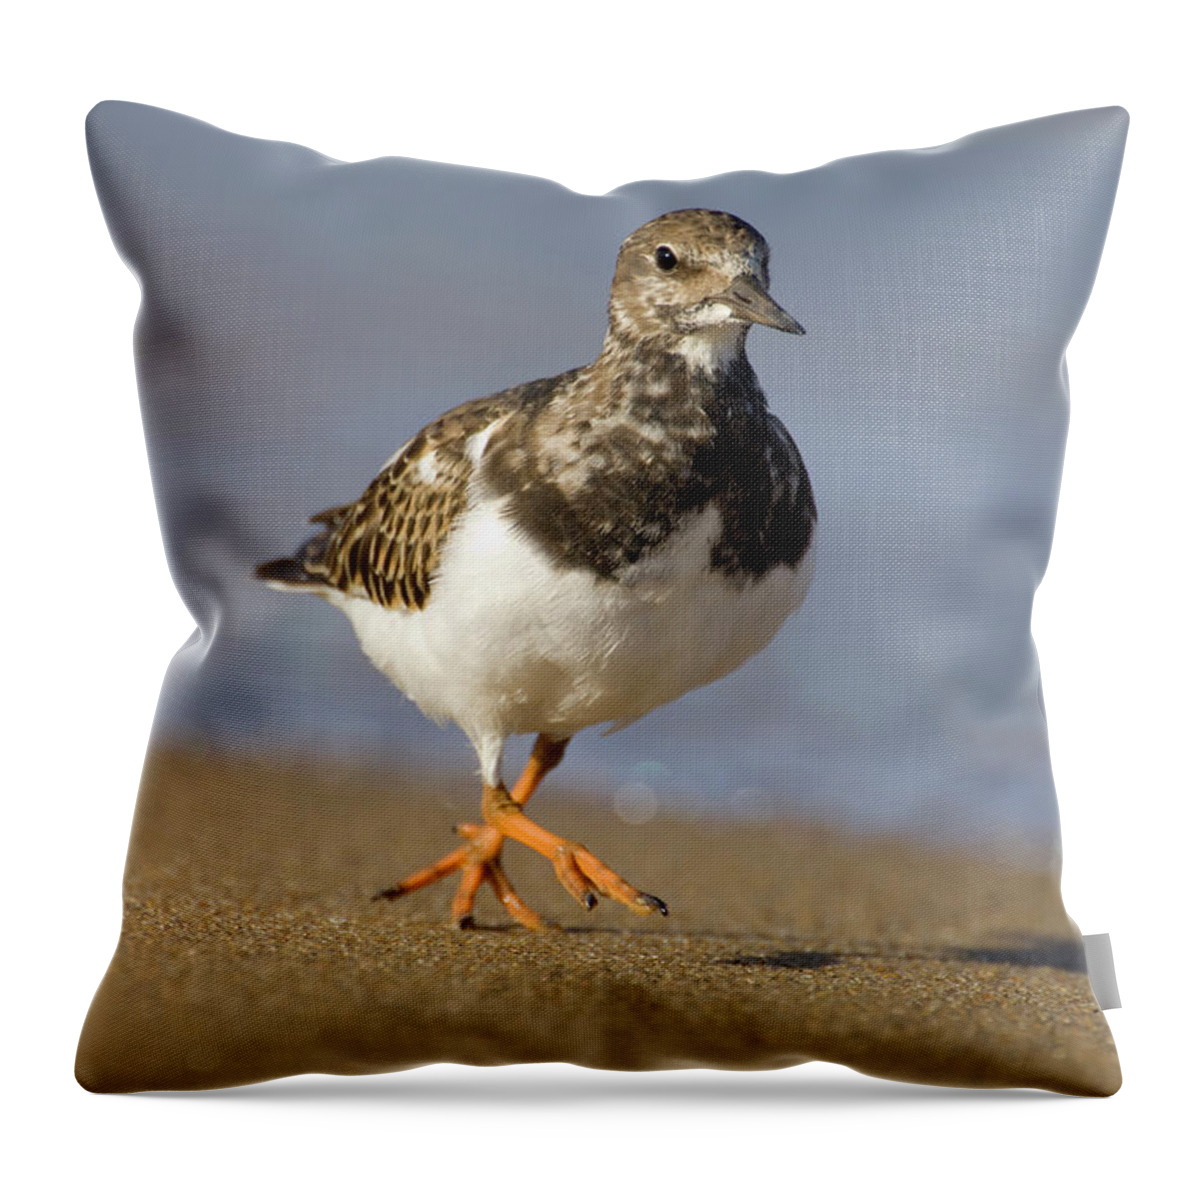 Fn Throw Pillow featuring the photograph Ruddy Turnstone Arenaria Interpres by Do Van Dijck